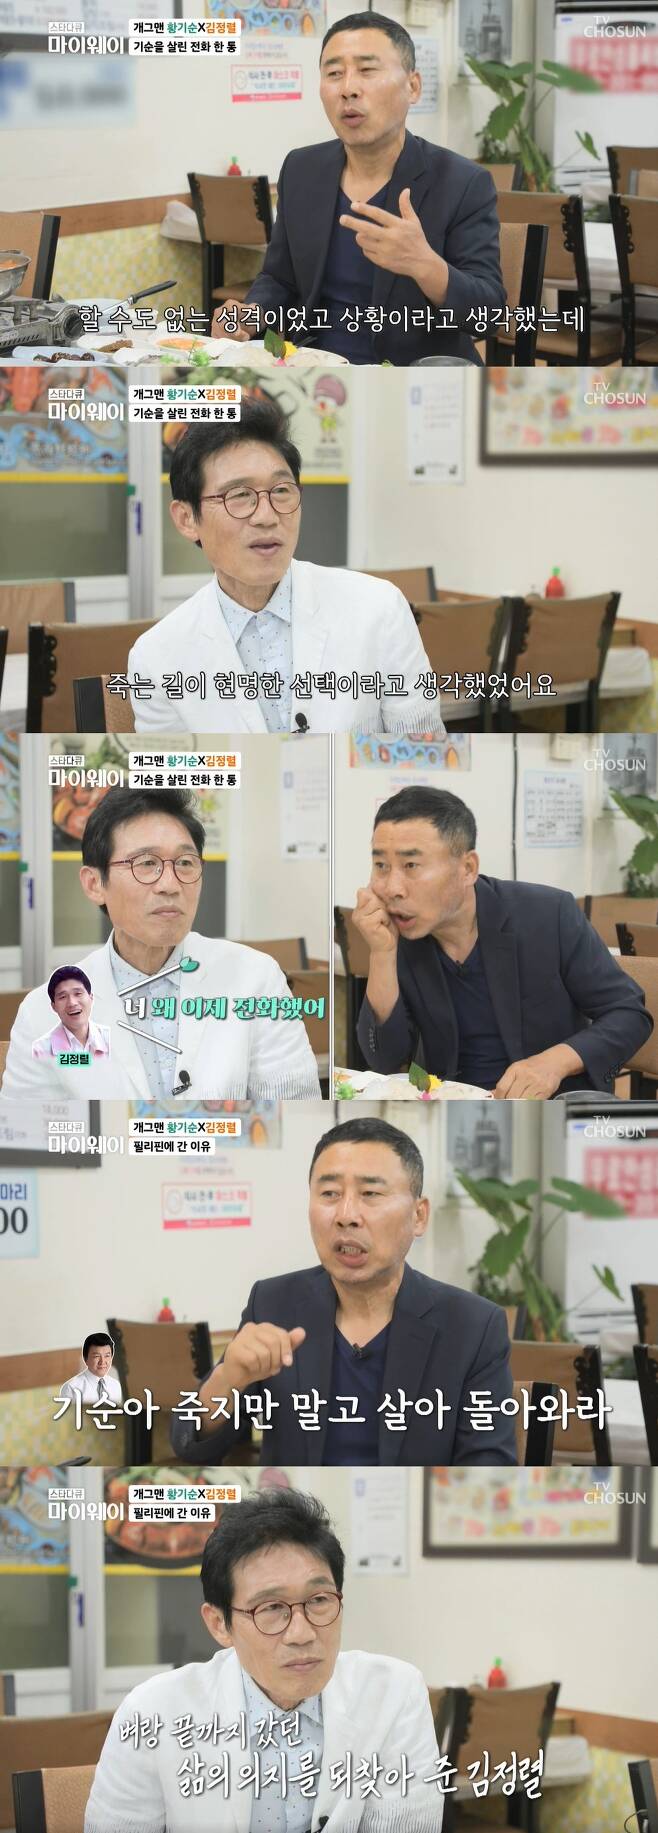 Comedian hwang ki-sun thanked his colleagues for restoring his will to life.Hwang ki-sun, who had been loved by the people in the 1980s and 90s, was featured in the star documentary star documentary myway broadcast on September 10th.On this day, hwang ki-sun met with kim jung-ryul, who was a gaggye senior and gambling overseas, who took care of himself at the time of his life in Philippine Escapism.hwang ki-sun recalled, I couldnt contact anyone, and I was in a situation. When I thought it was a wise choice to die, I called my brother with the determination to be scolded.The first word of kim jung-ryul was Why did you call now? Hwang ki-sun said, As soon as I heard the sound, I blocked the receiver and cried.Kim jung-ryul received a phone call and headed to the Philippines in two days. Kim jung-ryul said, I was so sick because my brother, who I loved so much, was crushed in another country.It could go wrong, he said.Hwang ki-sun said, I came with a side dish filled with apple boxes. Ju Byeong-jin wrote in a white envelope containing 400,000 won to 500,000 won, Do not die but come back alive. I thought my colleagues would point at me, but I was worried about me.Thanks to you, I was able to regain my will to live. 